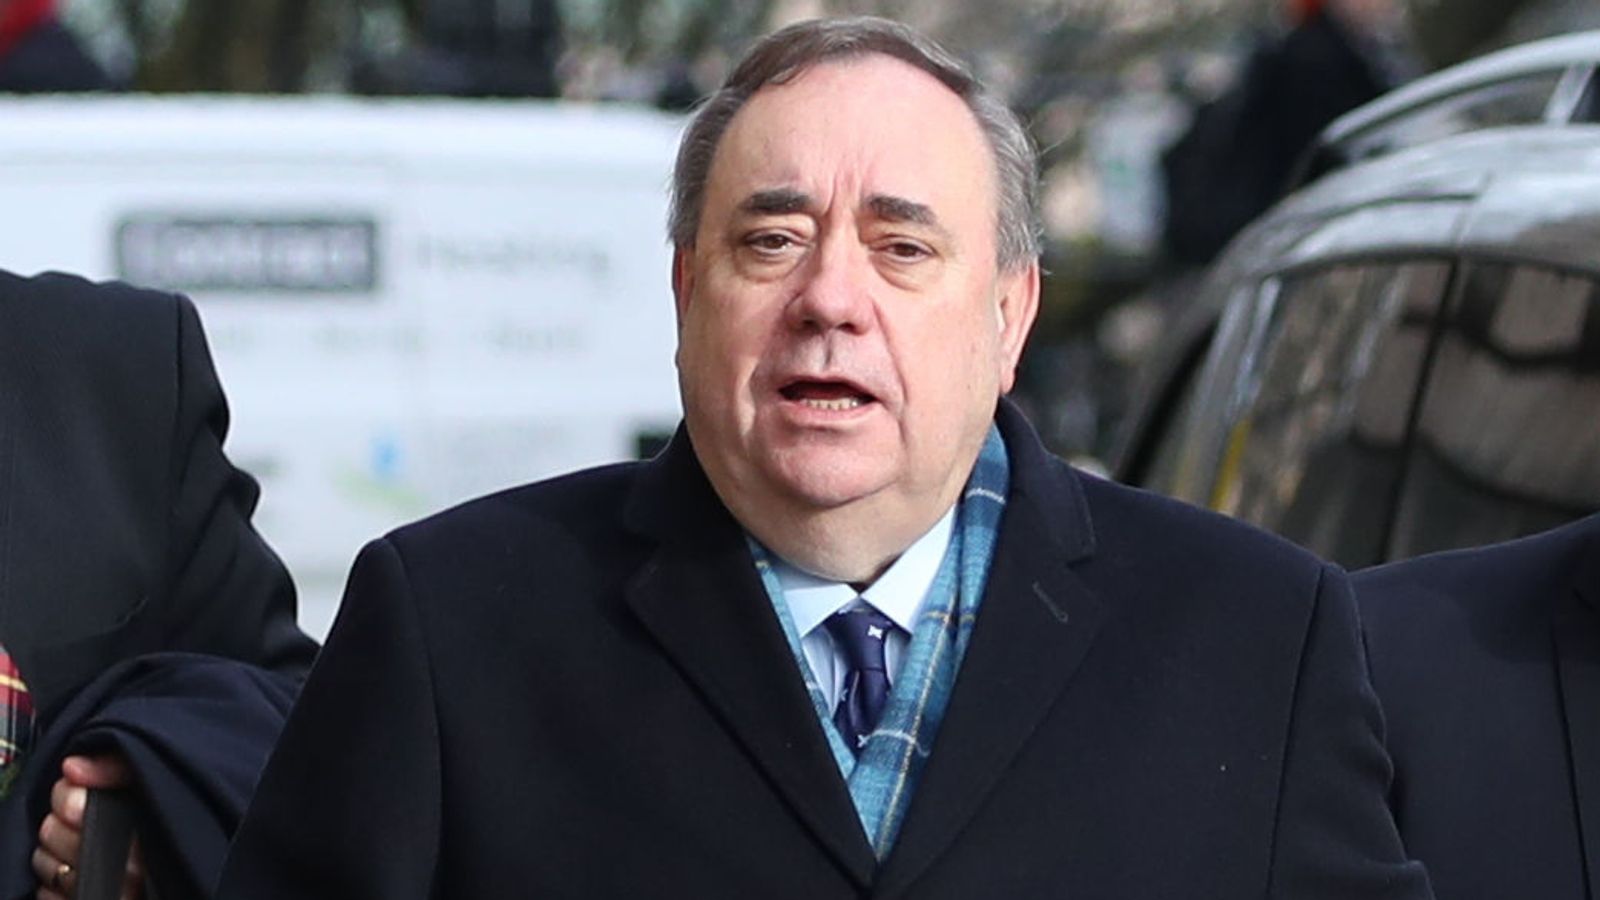 Alex Salmond Trial Scotland S Former First Minister Acquitted Of All Sexual Assault Charges